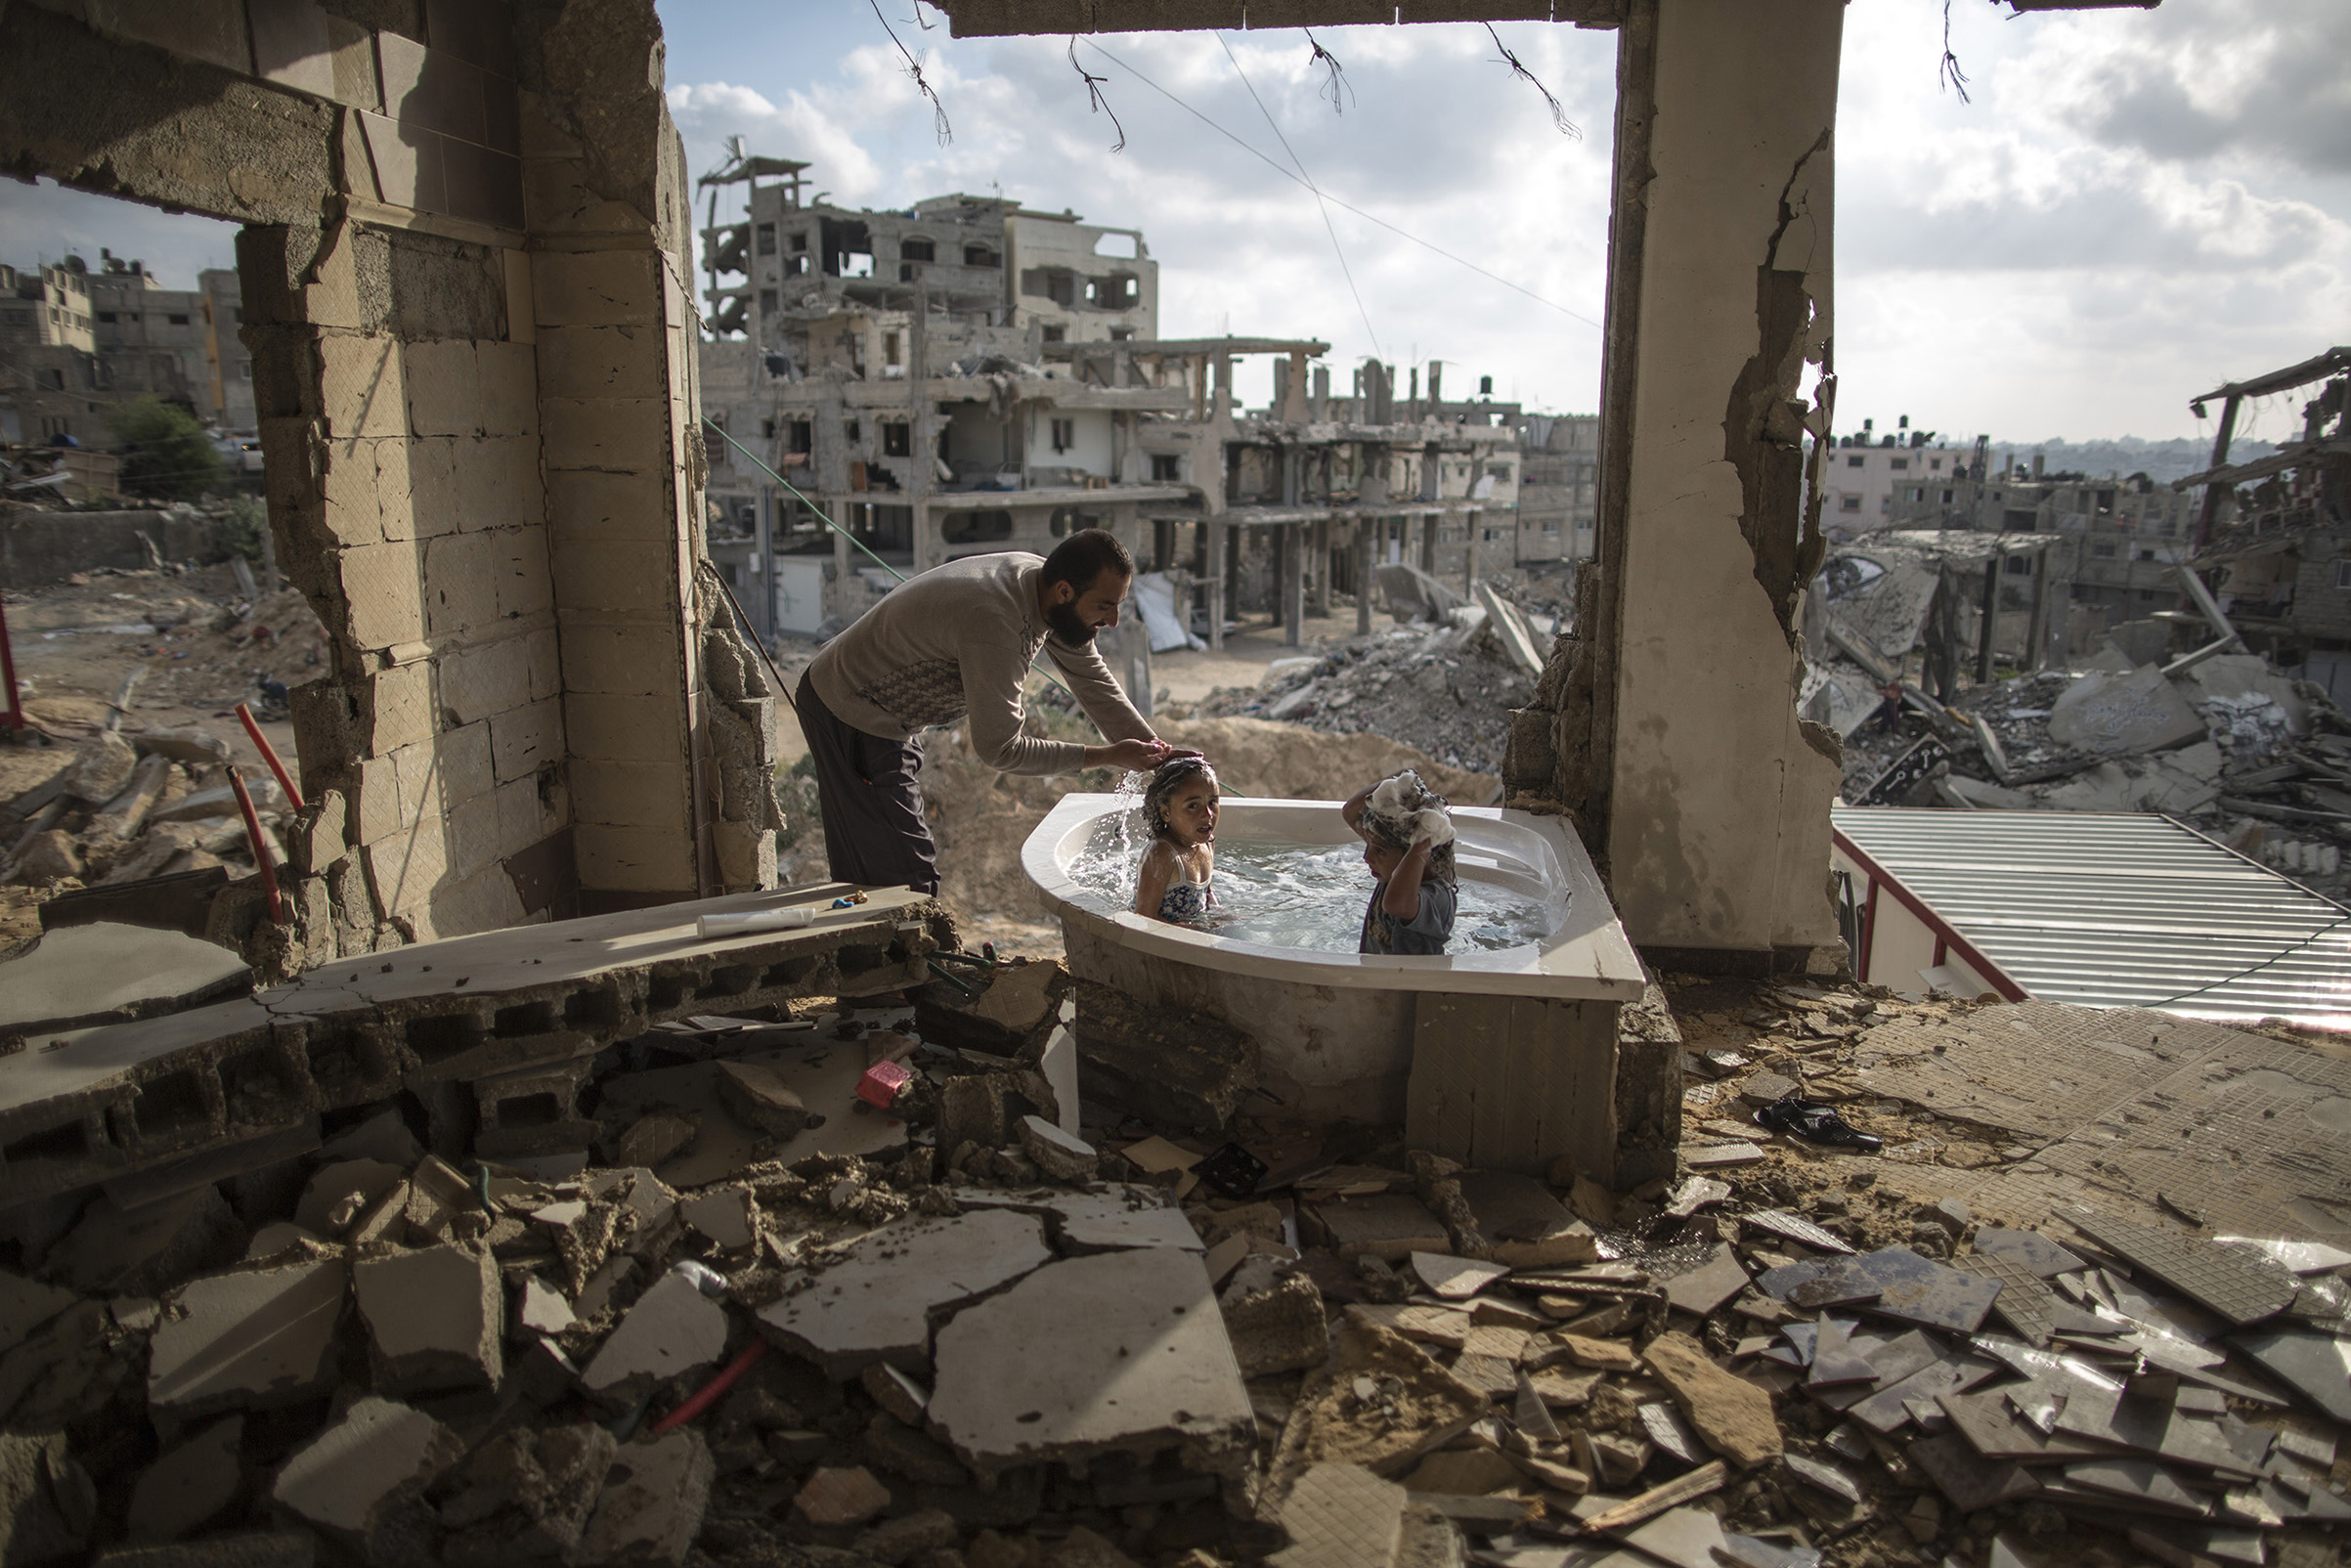 June 26, 2015  .Salem Saoody, 30, is getting his daughter Layan (L) and his niece Shaymaa 5 (R) in the only remaining piece from their damaged house, which is the bathing tub. They now live in a caravan near the rubbles. By Wissam Nassar.